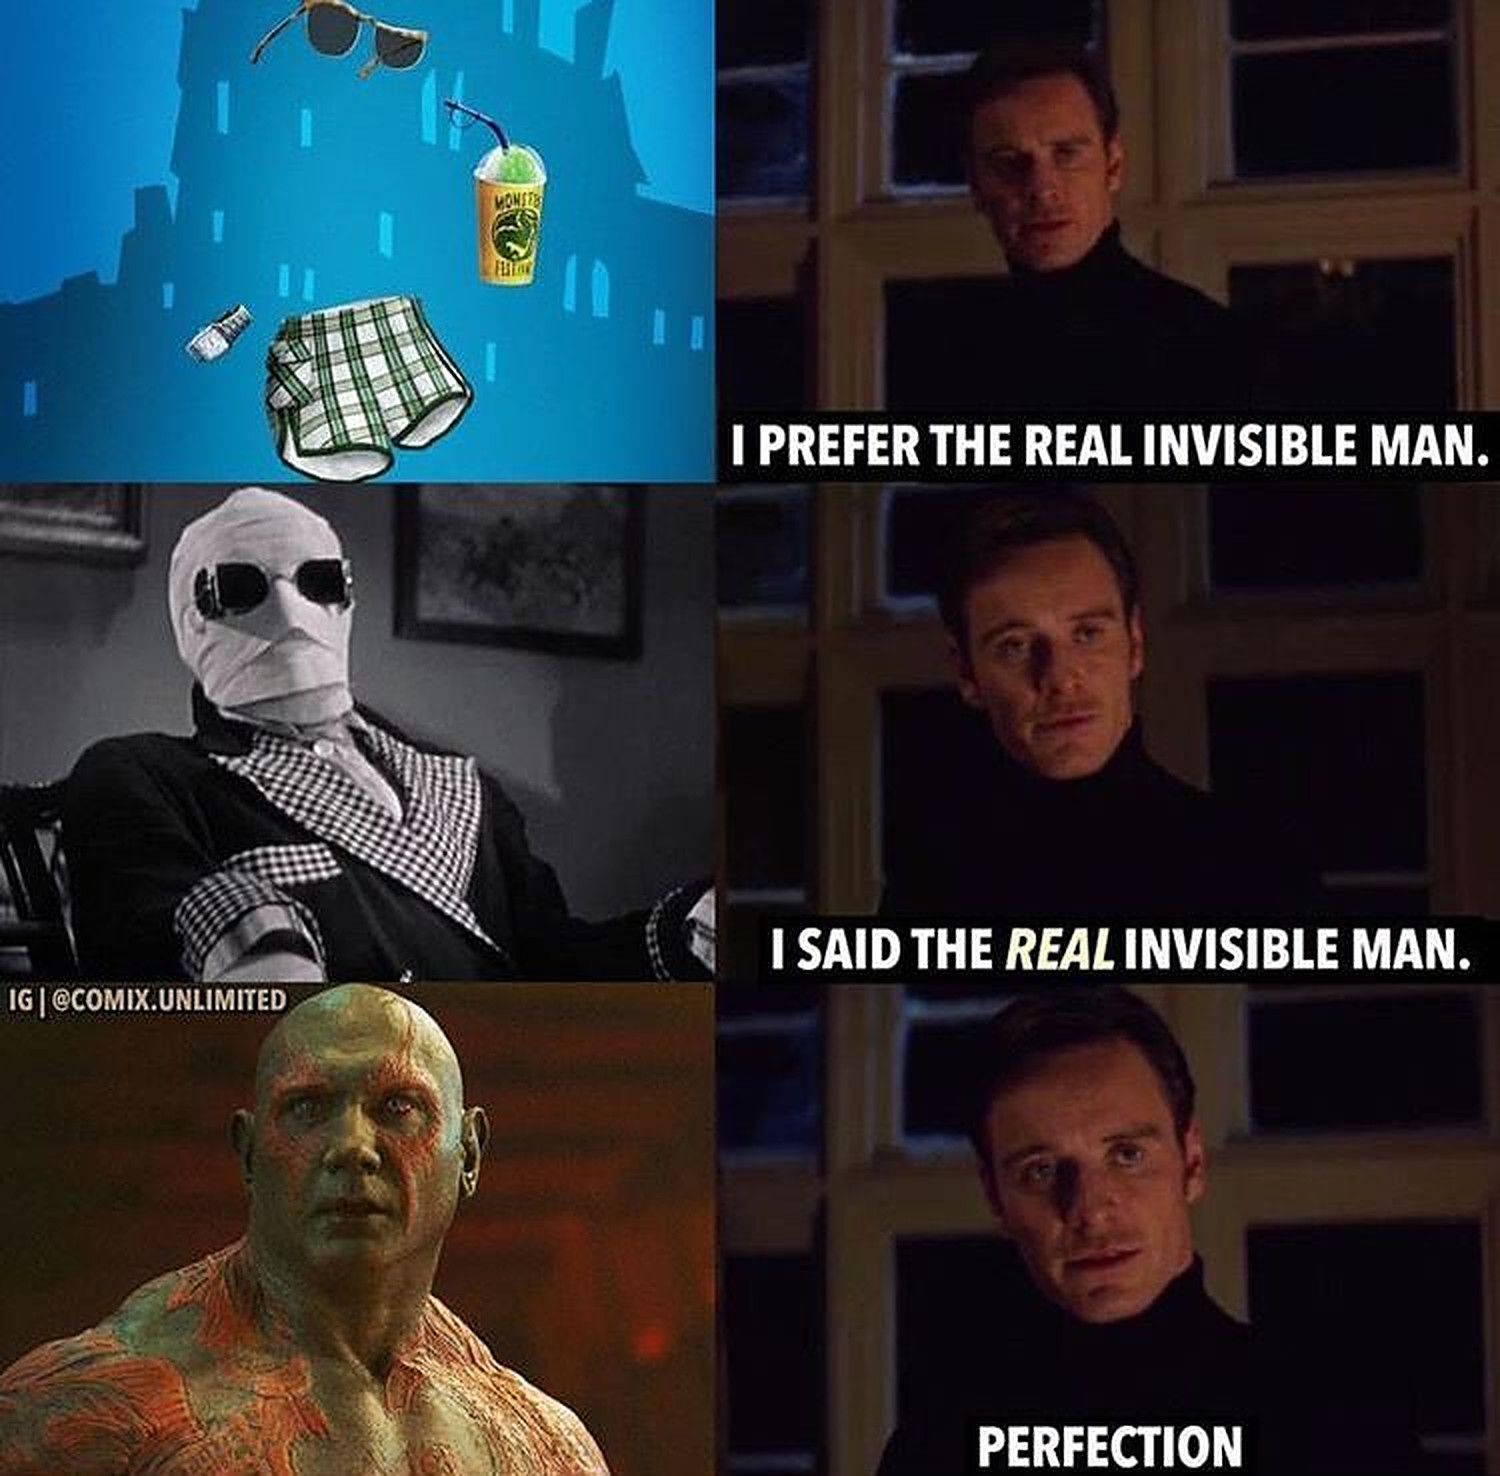 Magneto prefers the perfect invisible man which means Drax